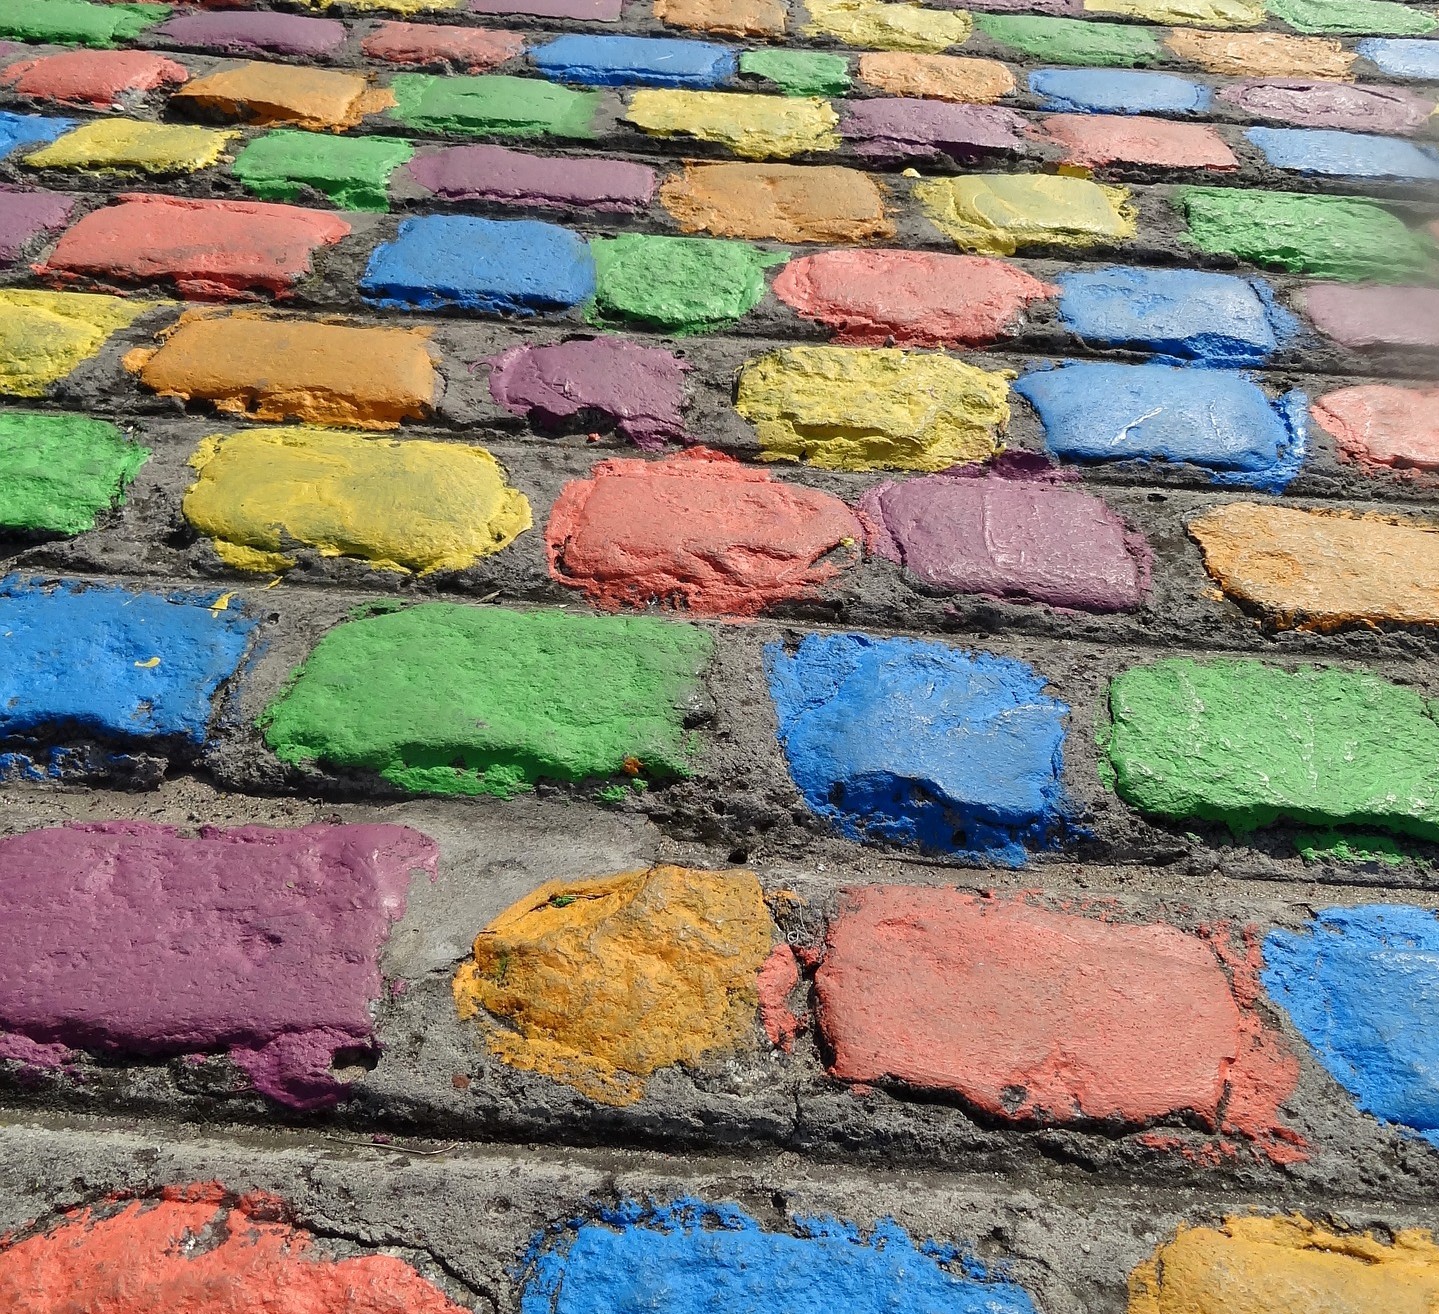 The picture shows a cobbled stone wall with painted stones in multiple different colors.